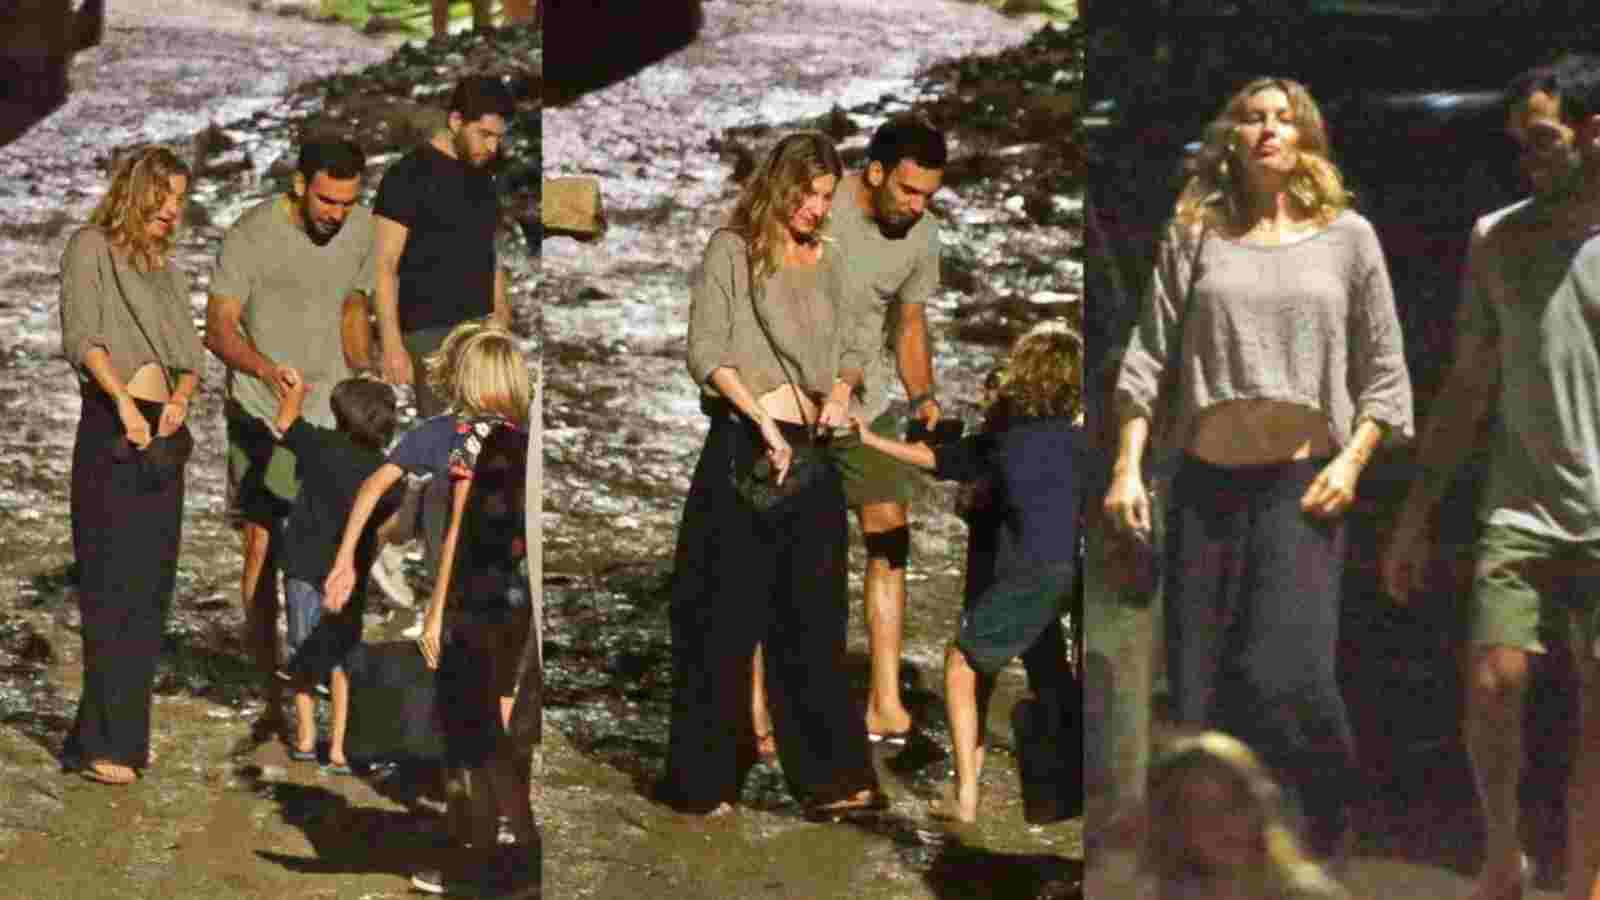 Page Six spotted Gisele Bündchen on a dinner date with a new guy after her divorce with Tom Brady